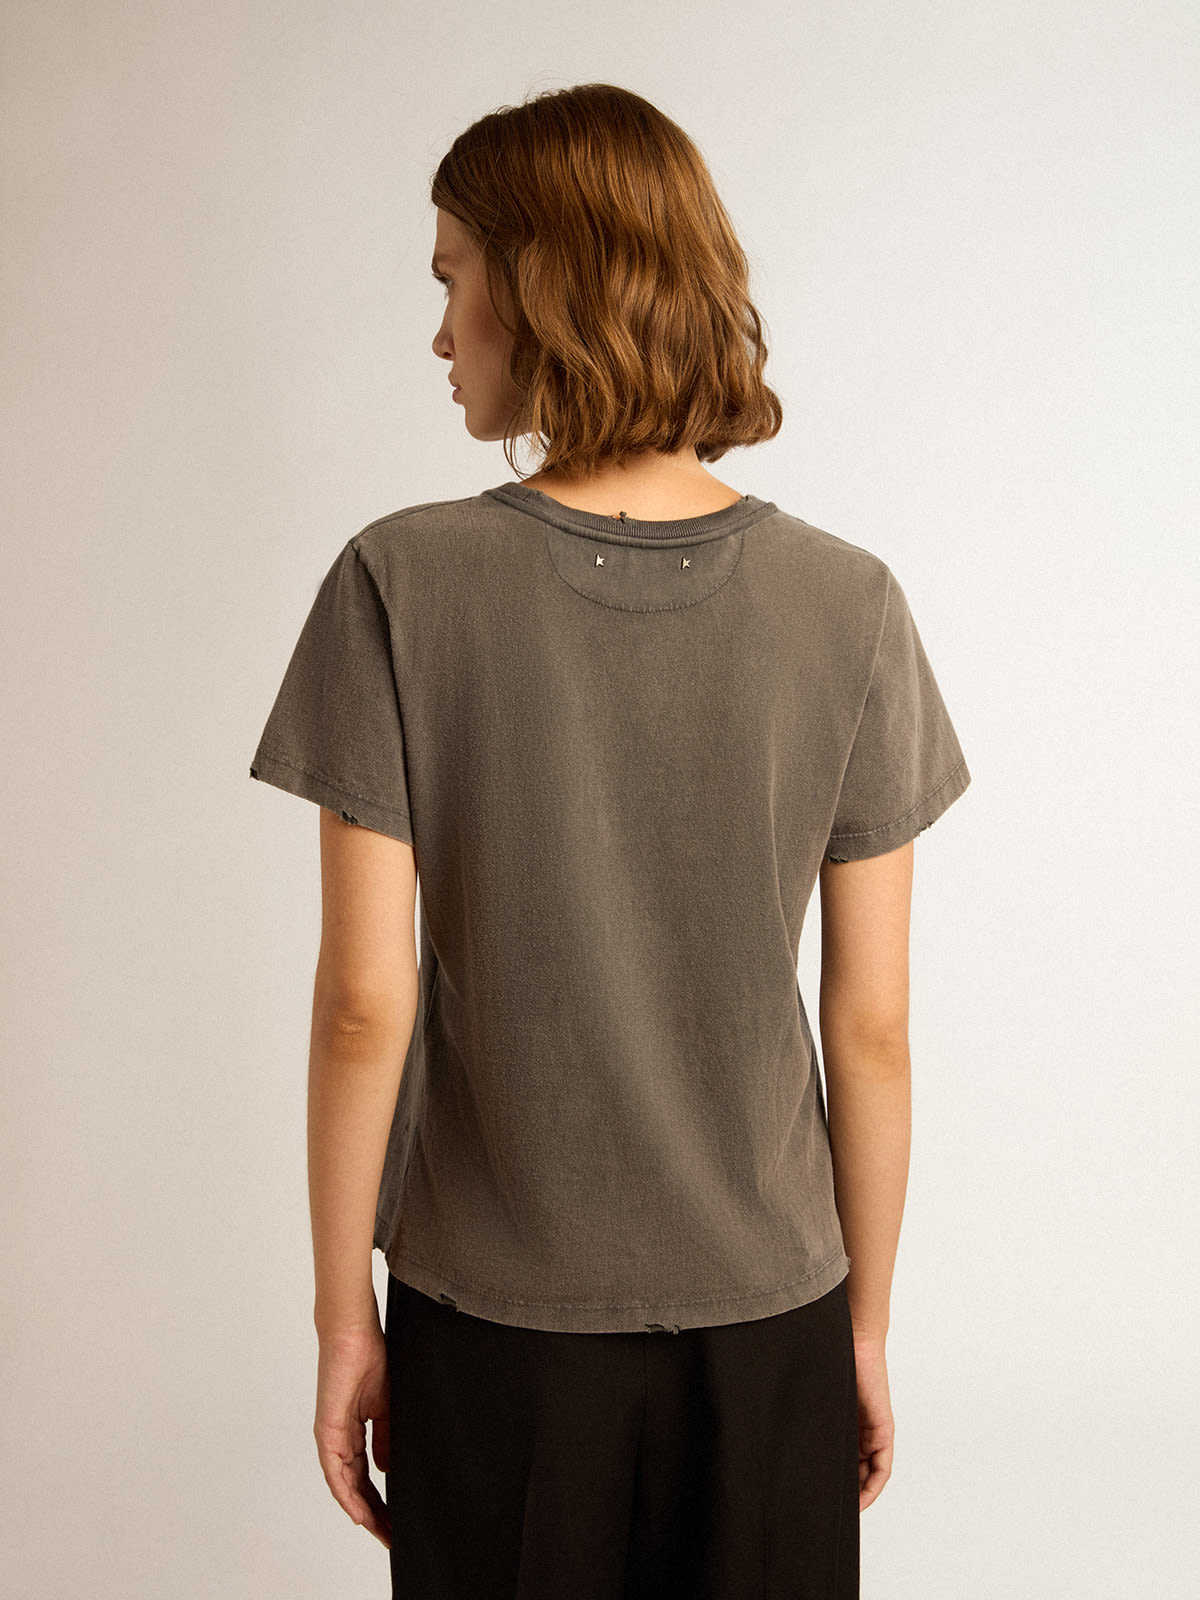 Golden Goose - Distressed slim-fit T-shirt in anthracite gray in 